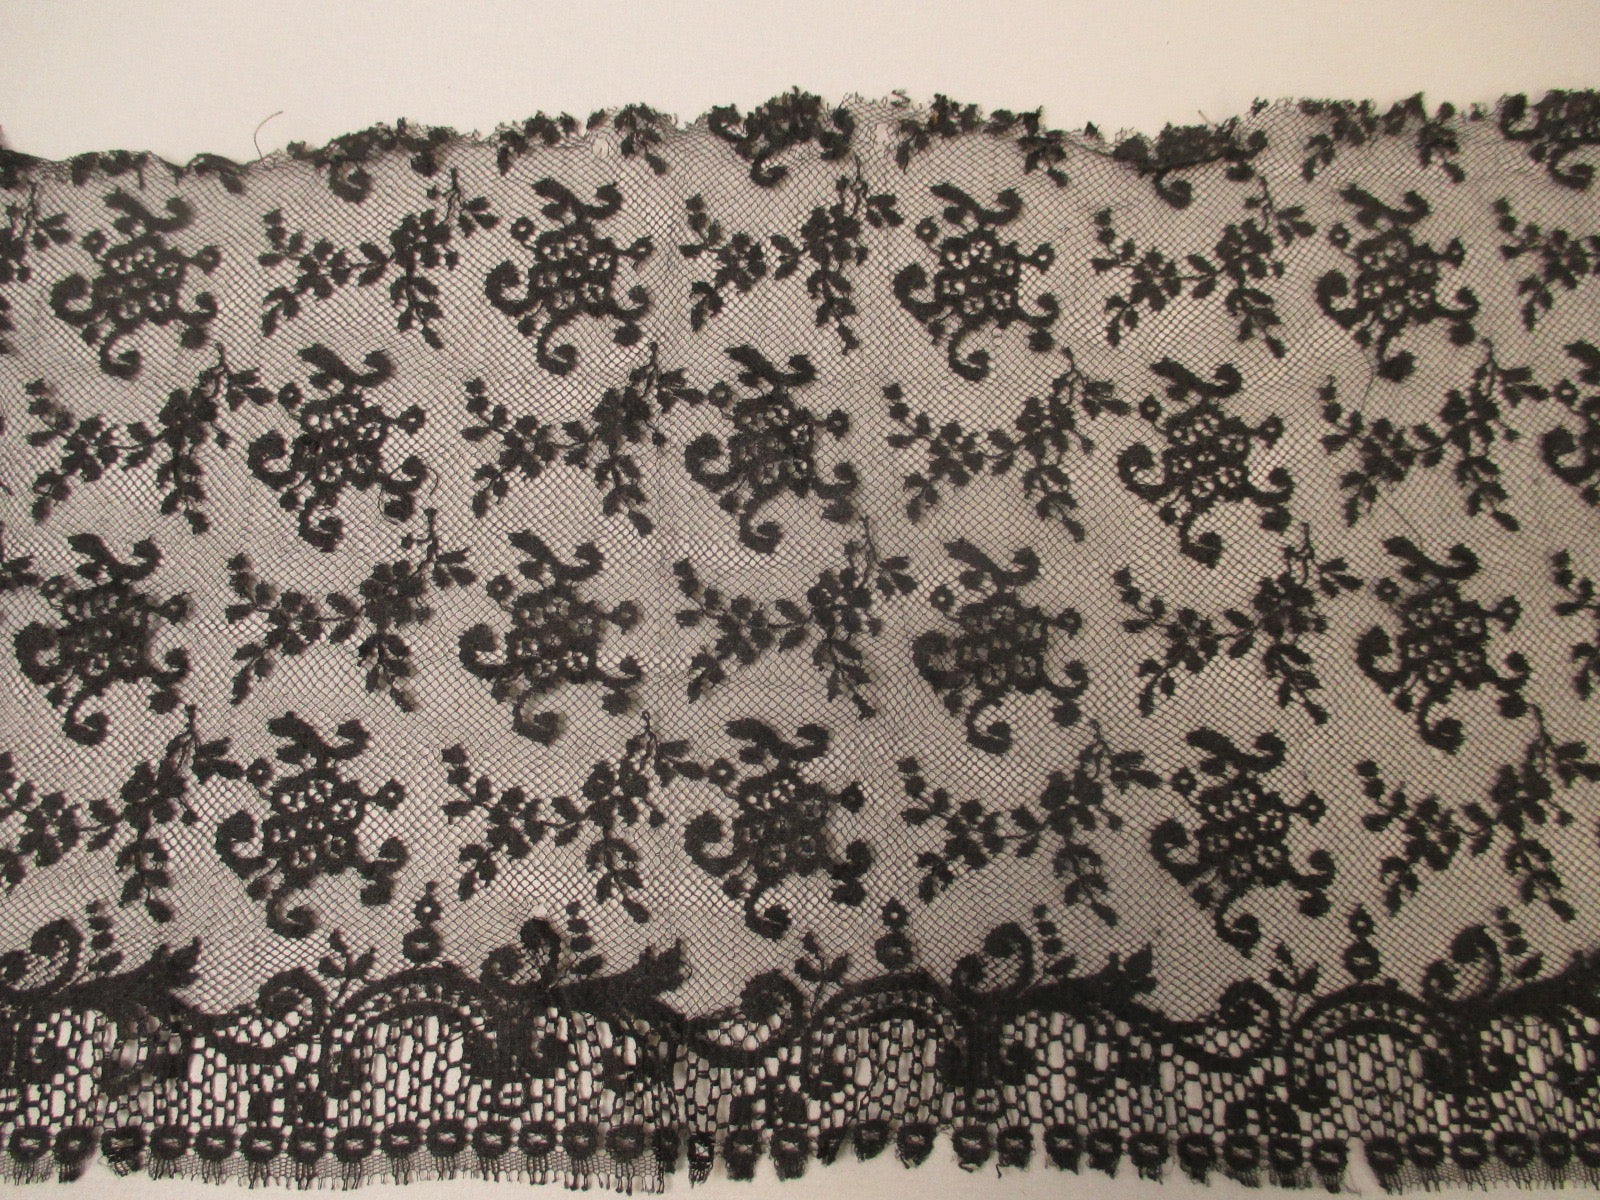 Antique Victorian chantilly lace remnant